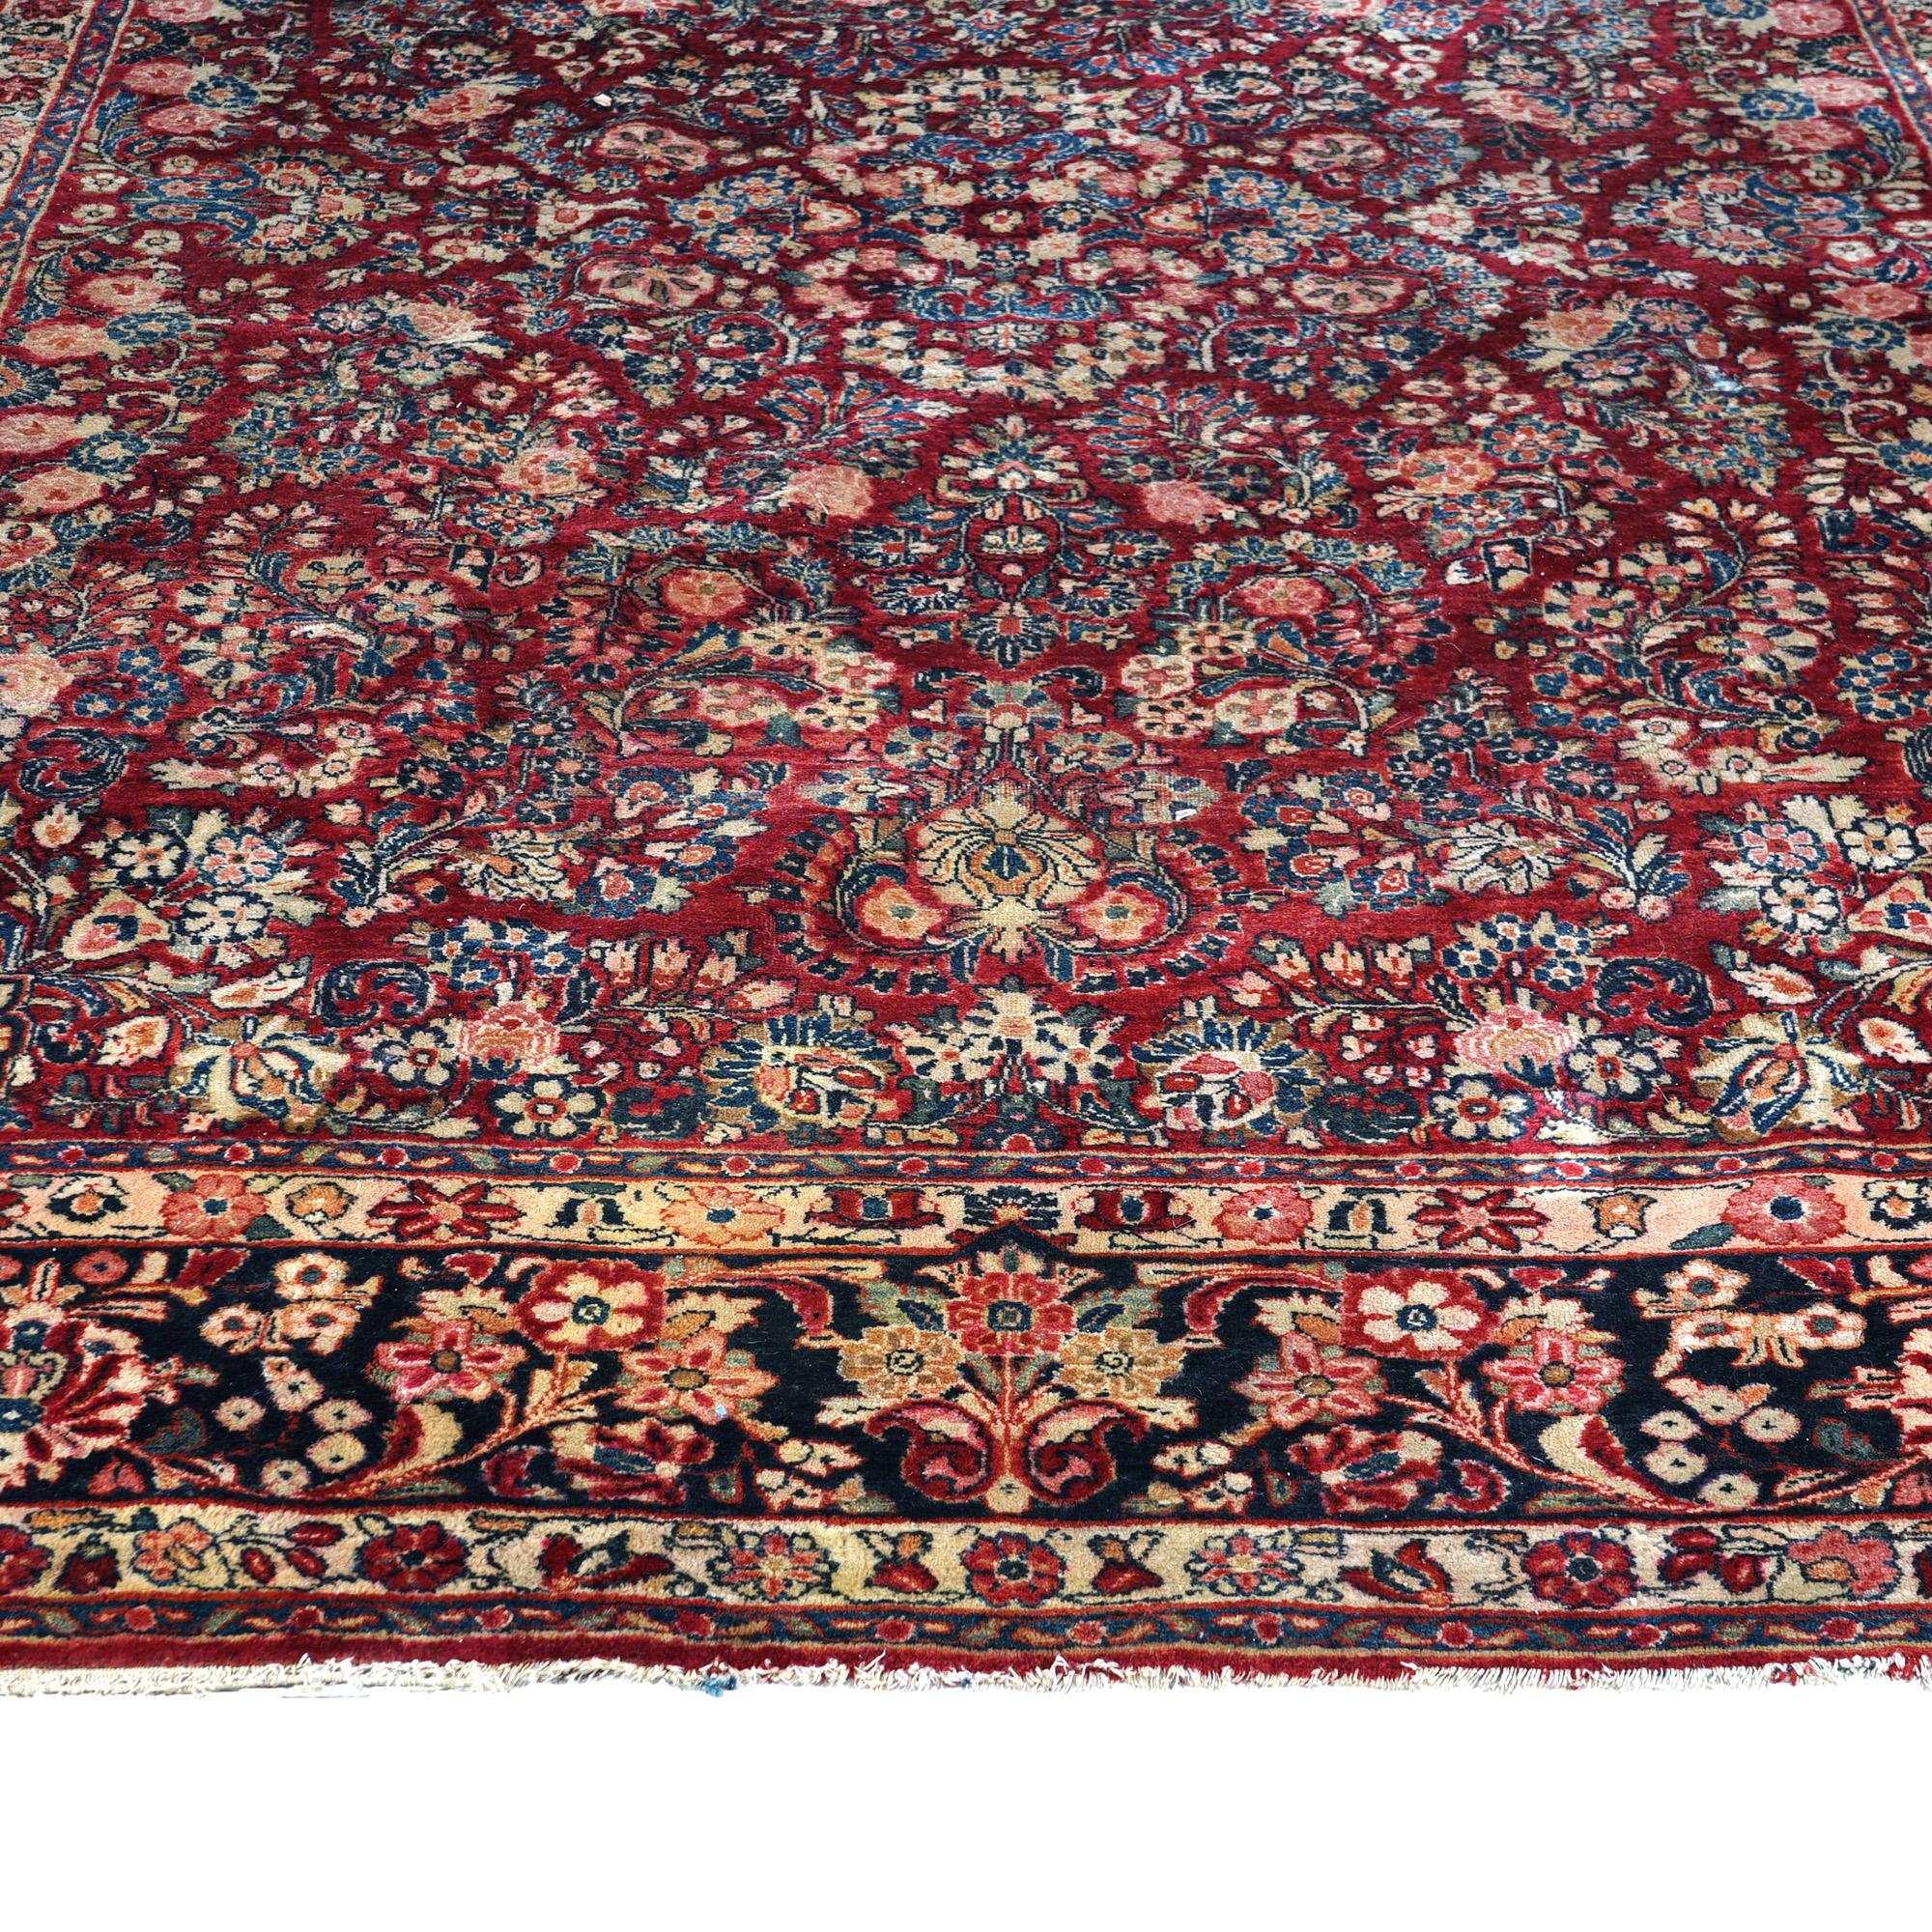 Antique Sarouk Oriental Wool Carpet  9’ X 12’ C1930 In Good Condition For Sale In Big Flats, NY